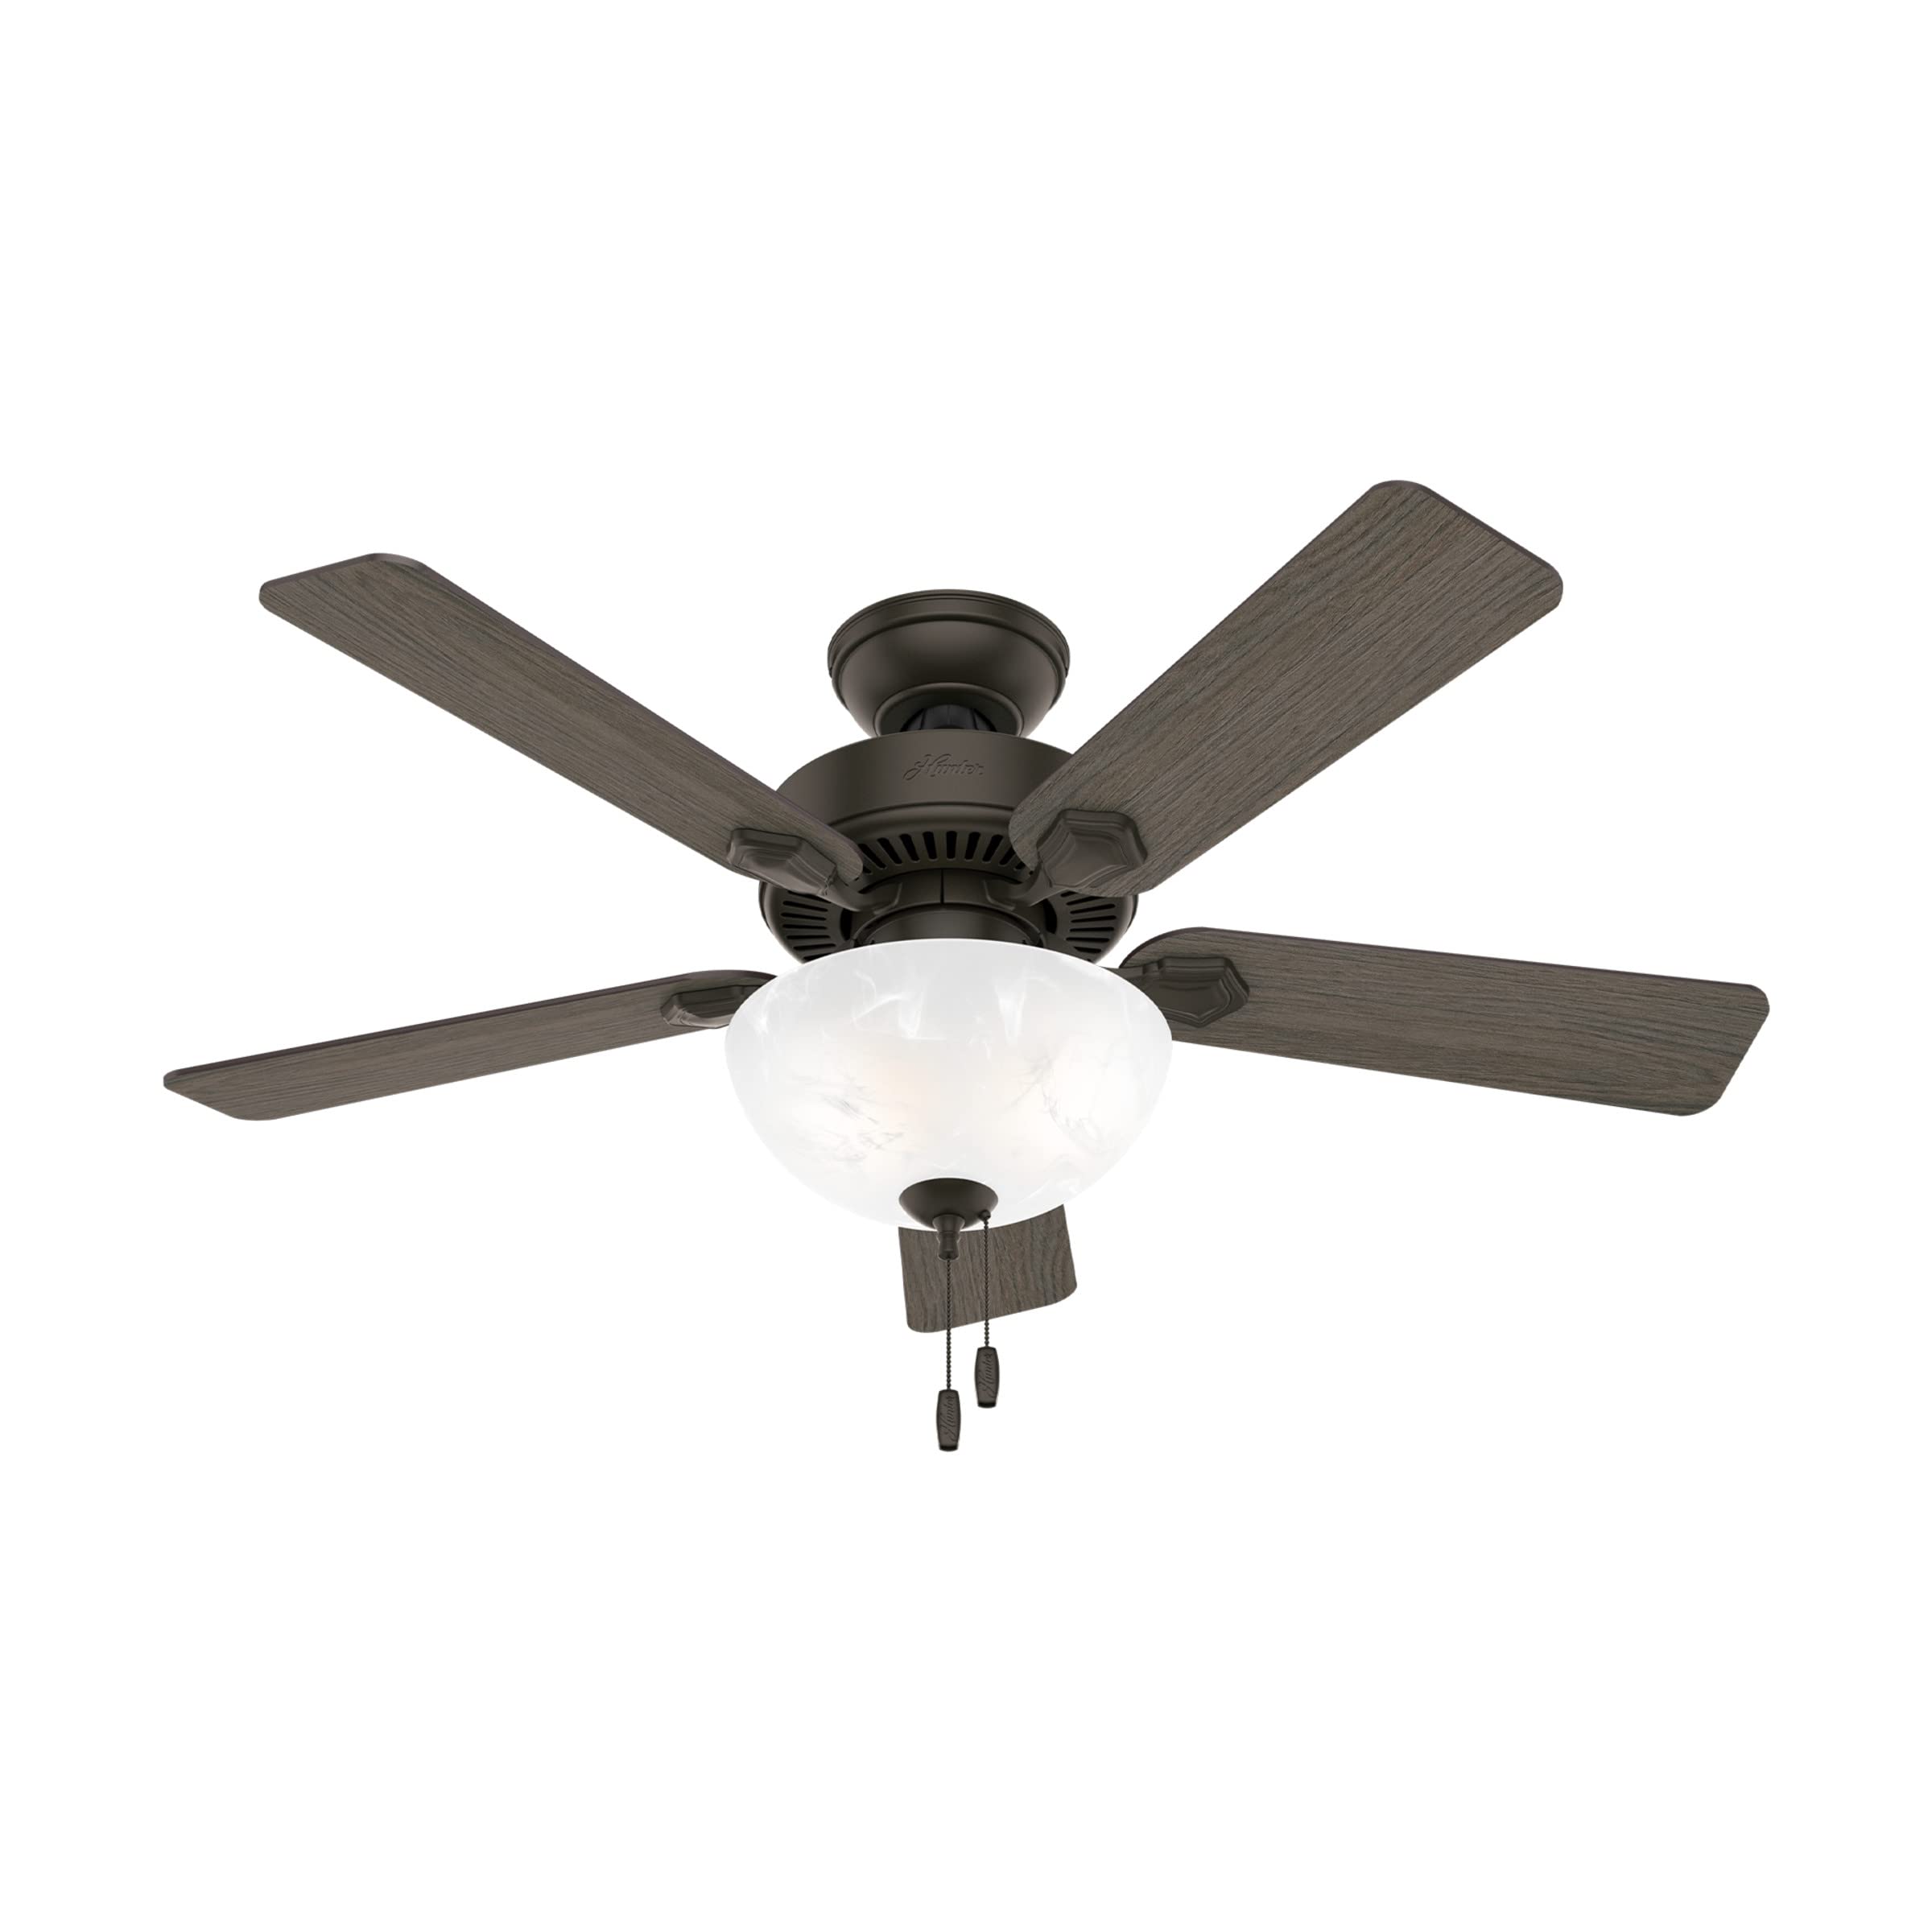 Hunter Swanson 44-inch Indoor New Bronze Casual Ceiling Fan With Bright LED Light Kit, Pull Chains, and Reversible WhisperWind Motor Included